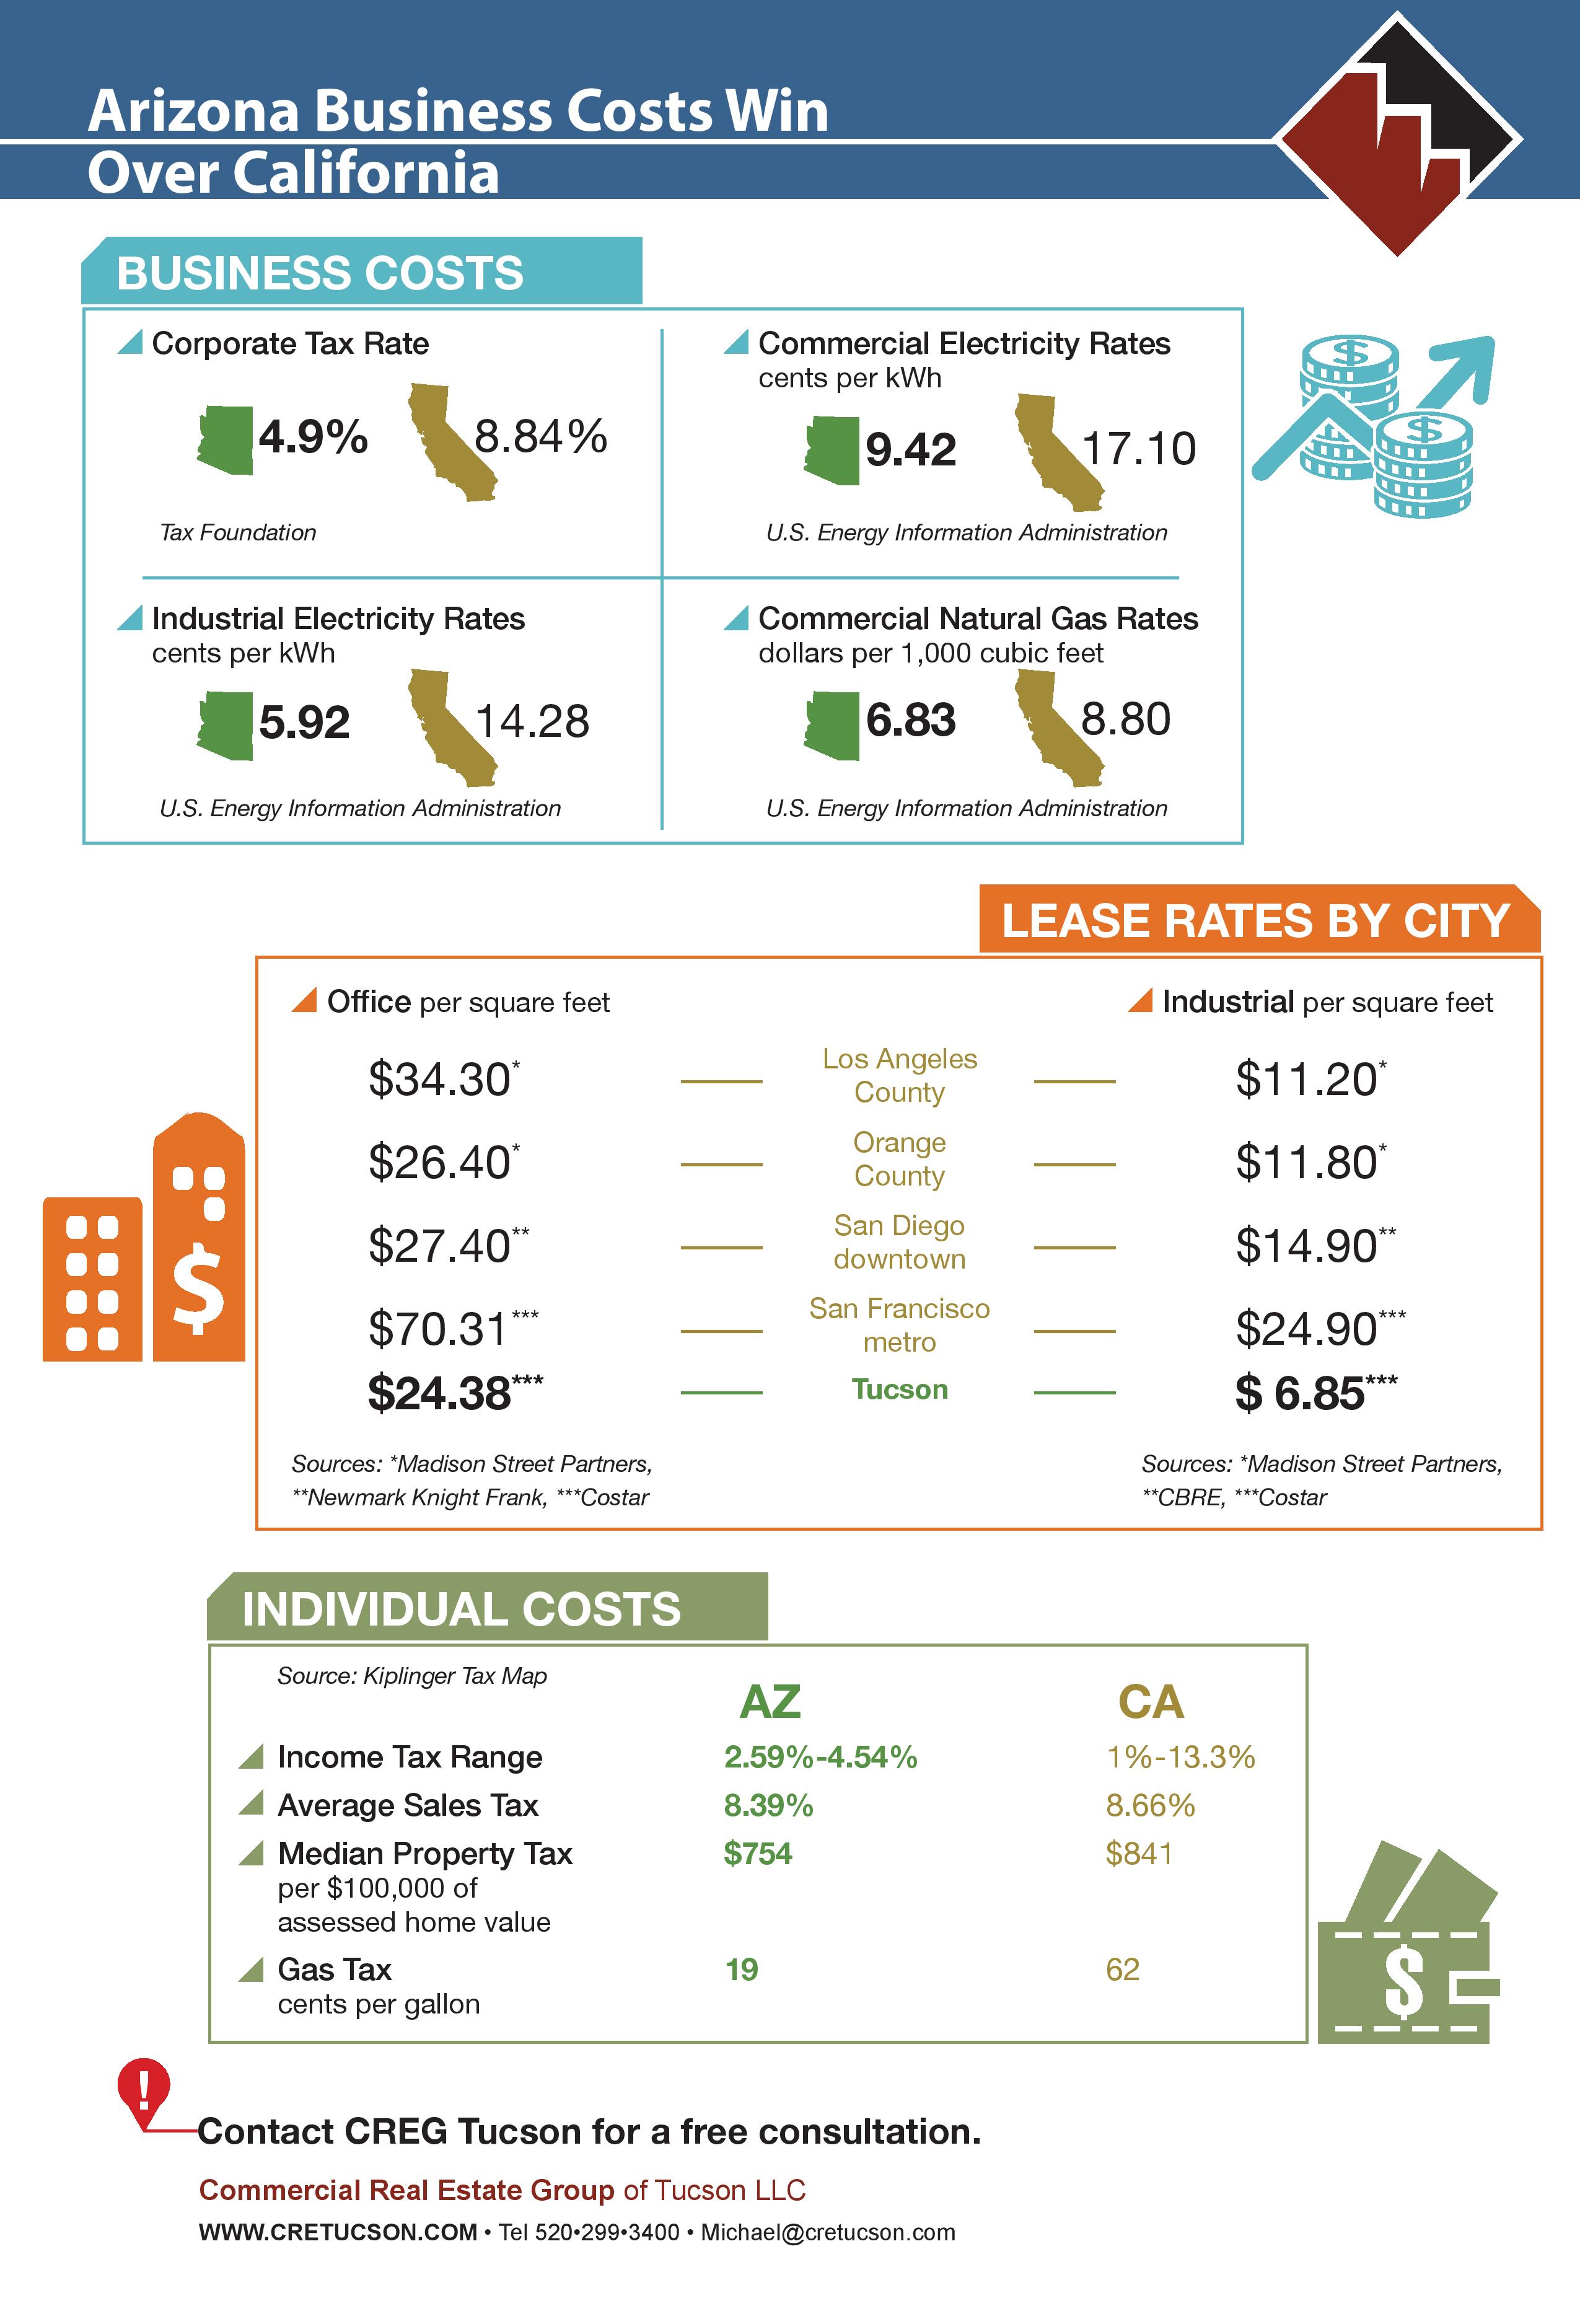 Infographic compares Arizona and California in utilities, taxes and leases, as well as personal taxes.